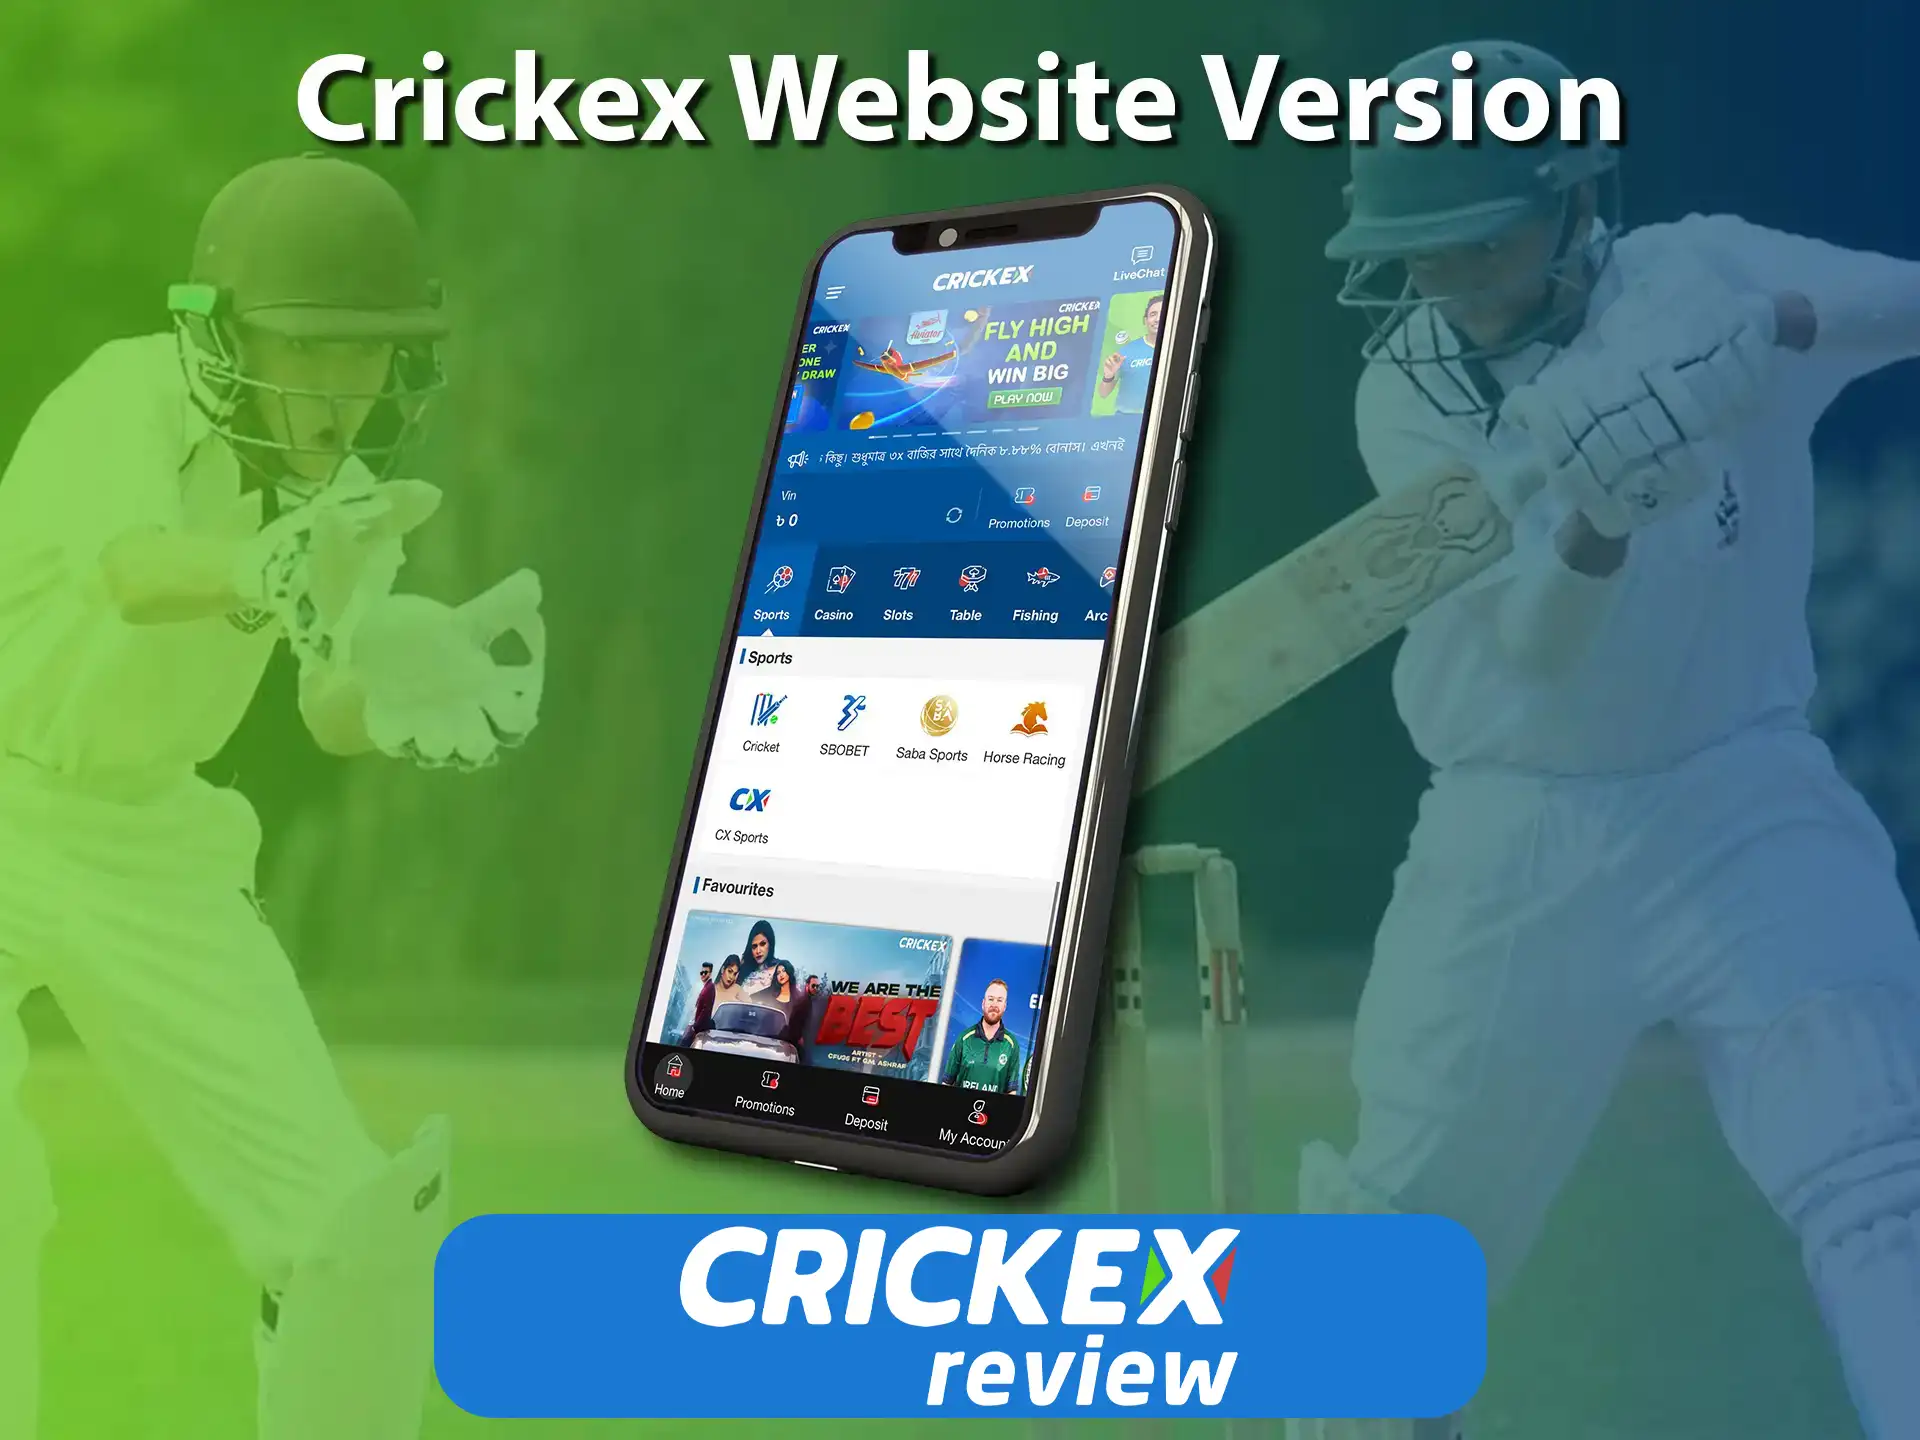 You can use the mobile version of the Crickex website and access all content.